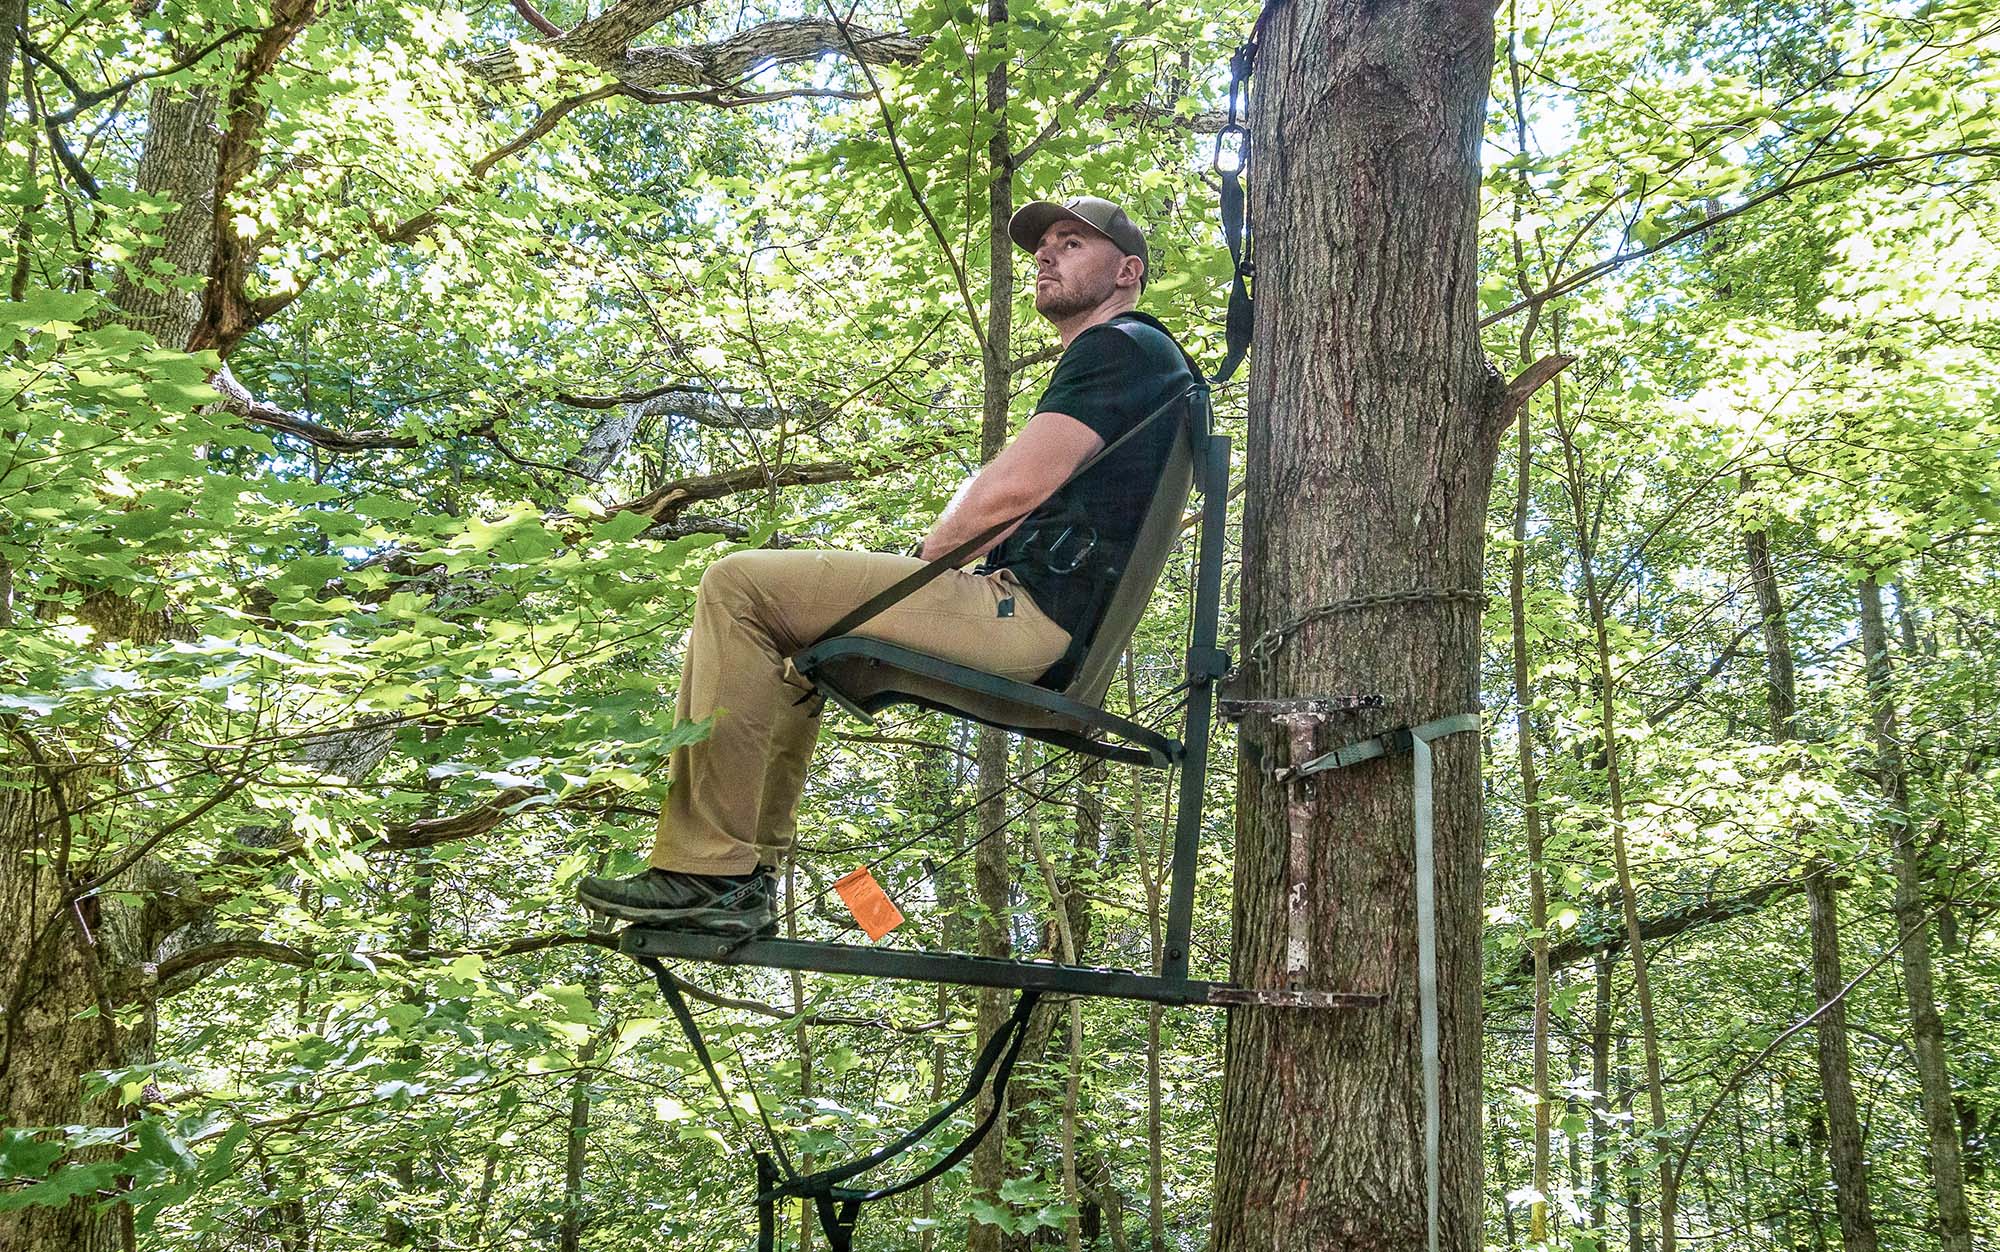 The M100U Ultralite is a comfortable treestand.